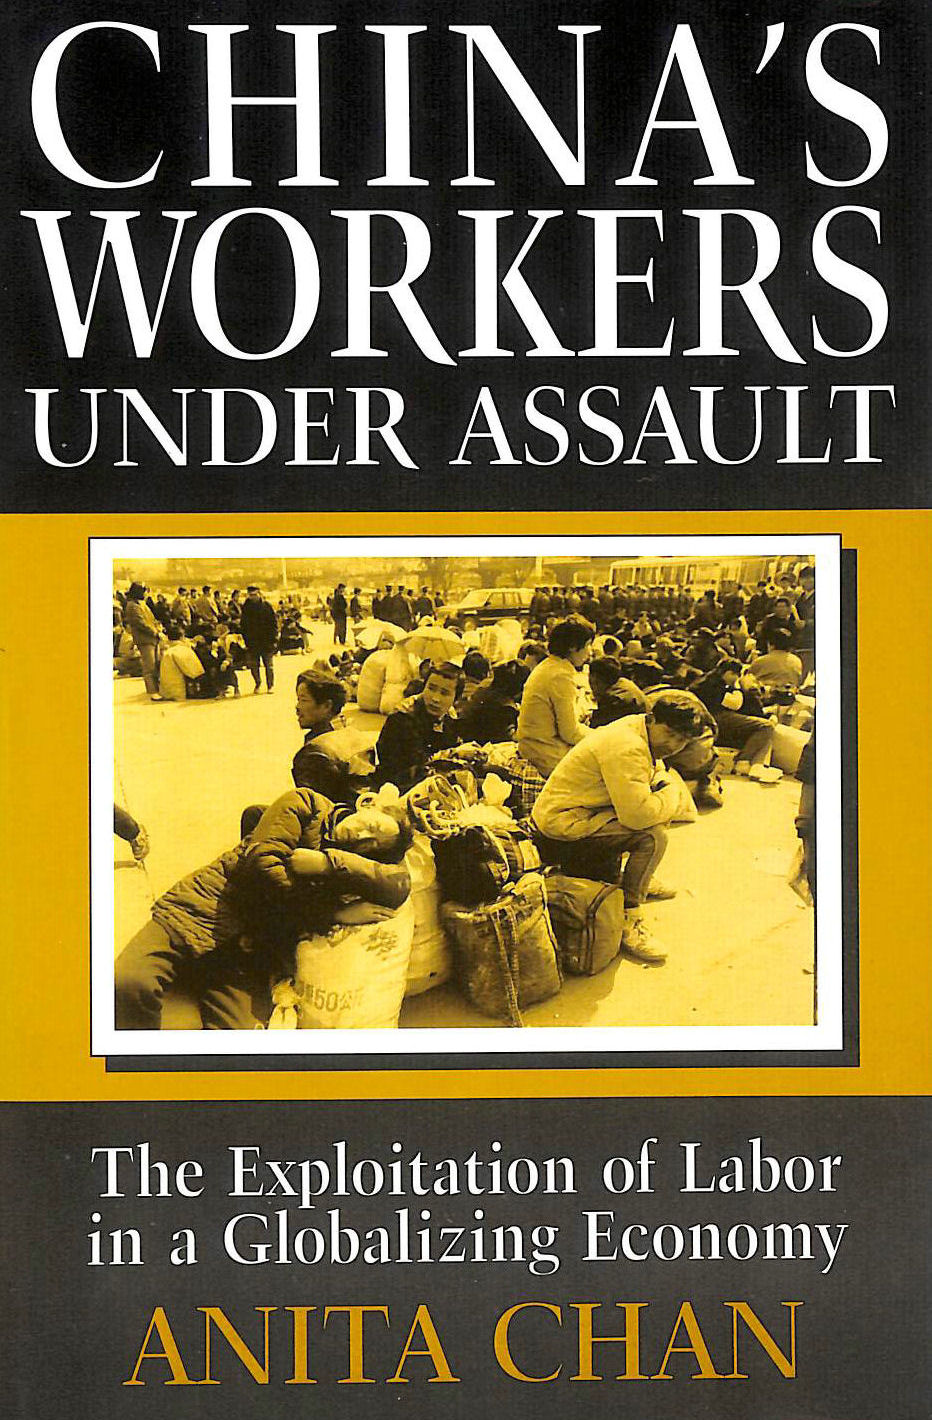  - China's Workers Under Assault: The Exploitation of Labor in a Globalizing Economy: Exploitation and Abuse in a Globalizing Economy (Asia & the Pacific (Paperback))